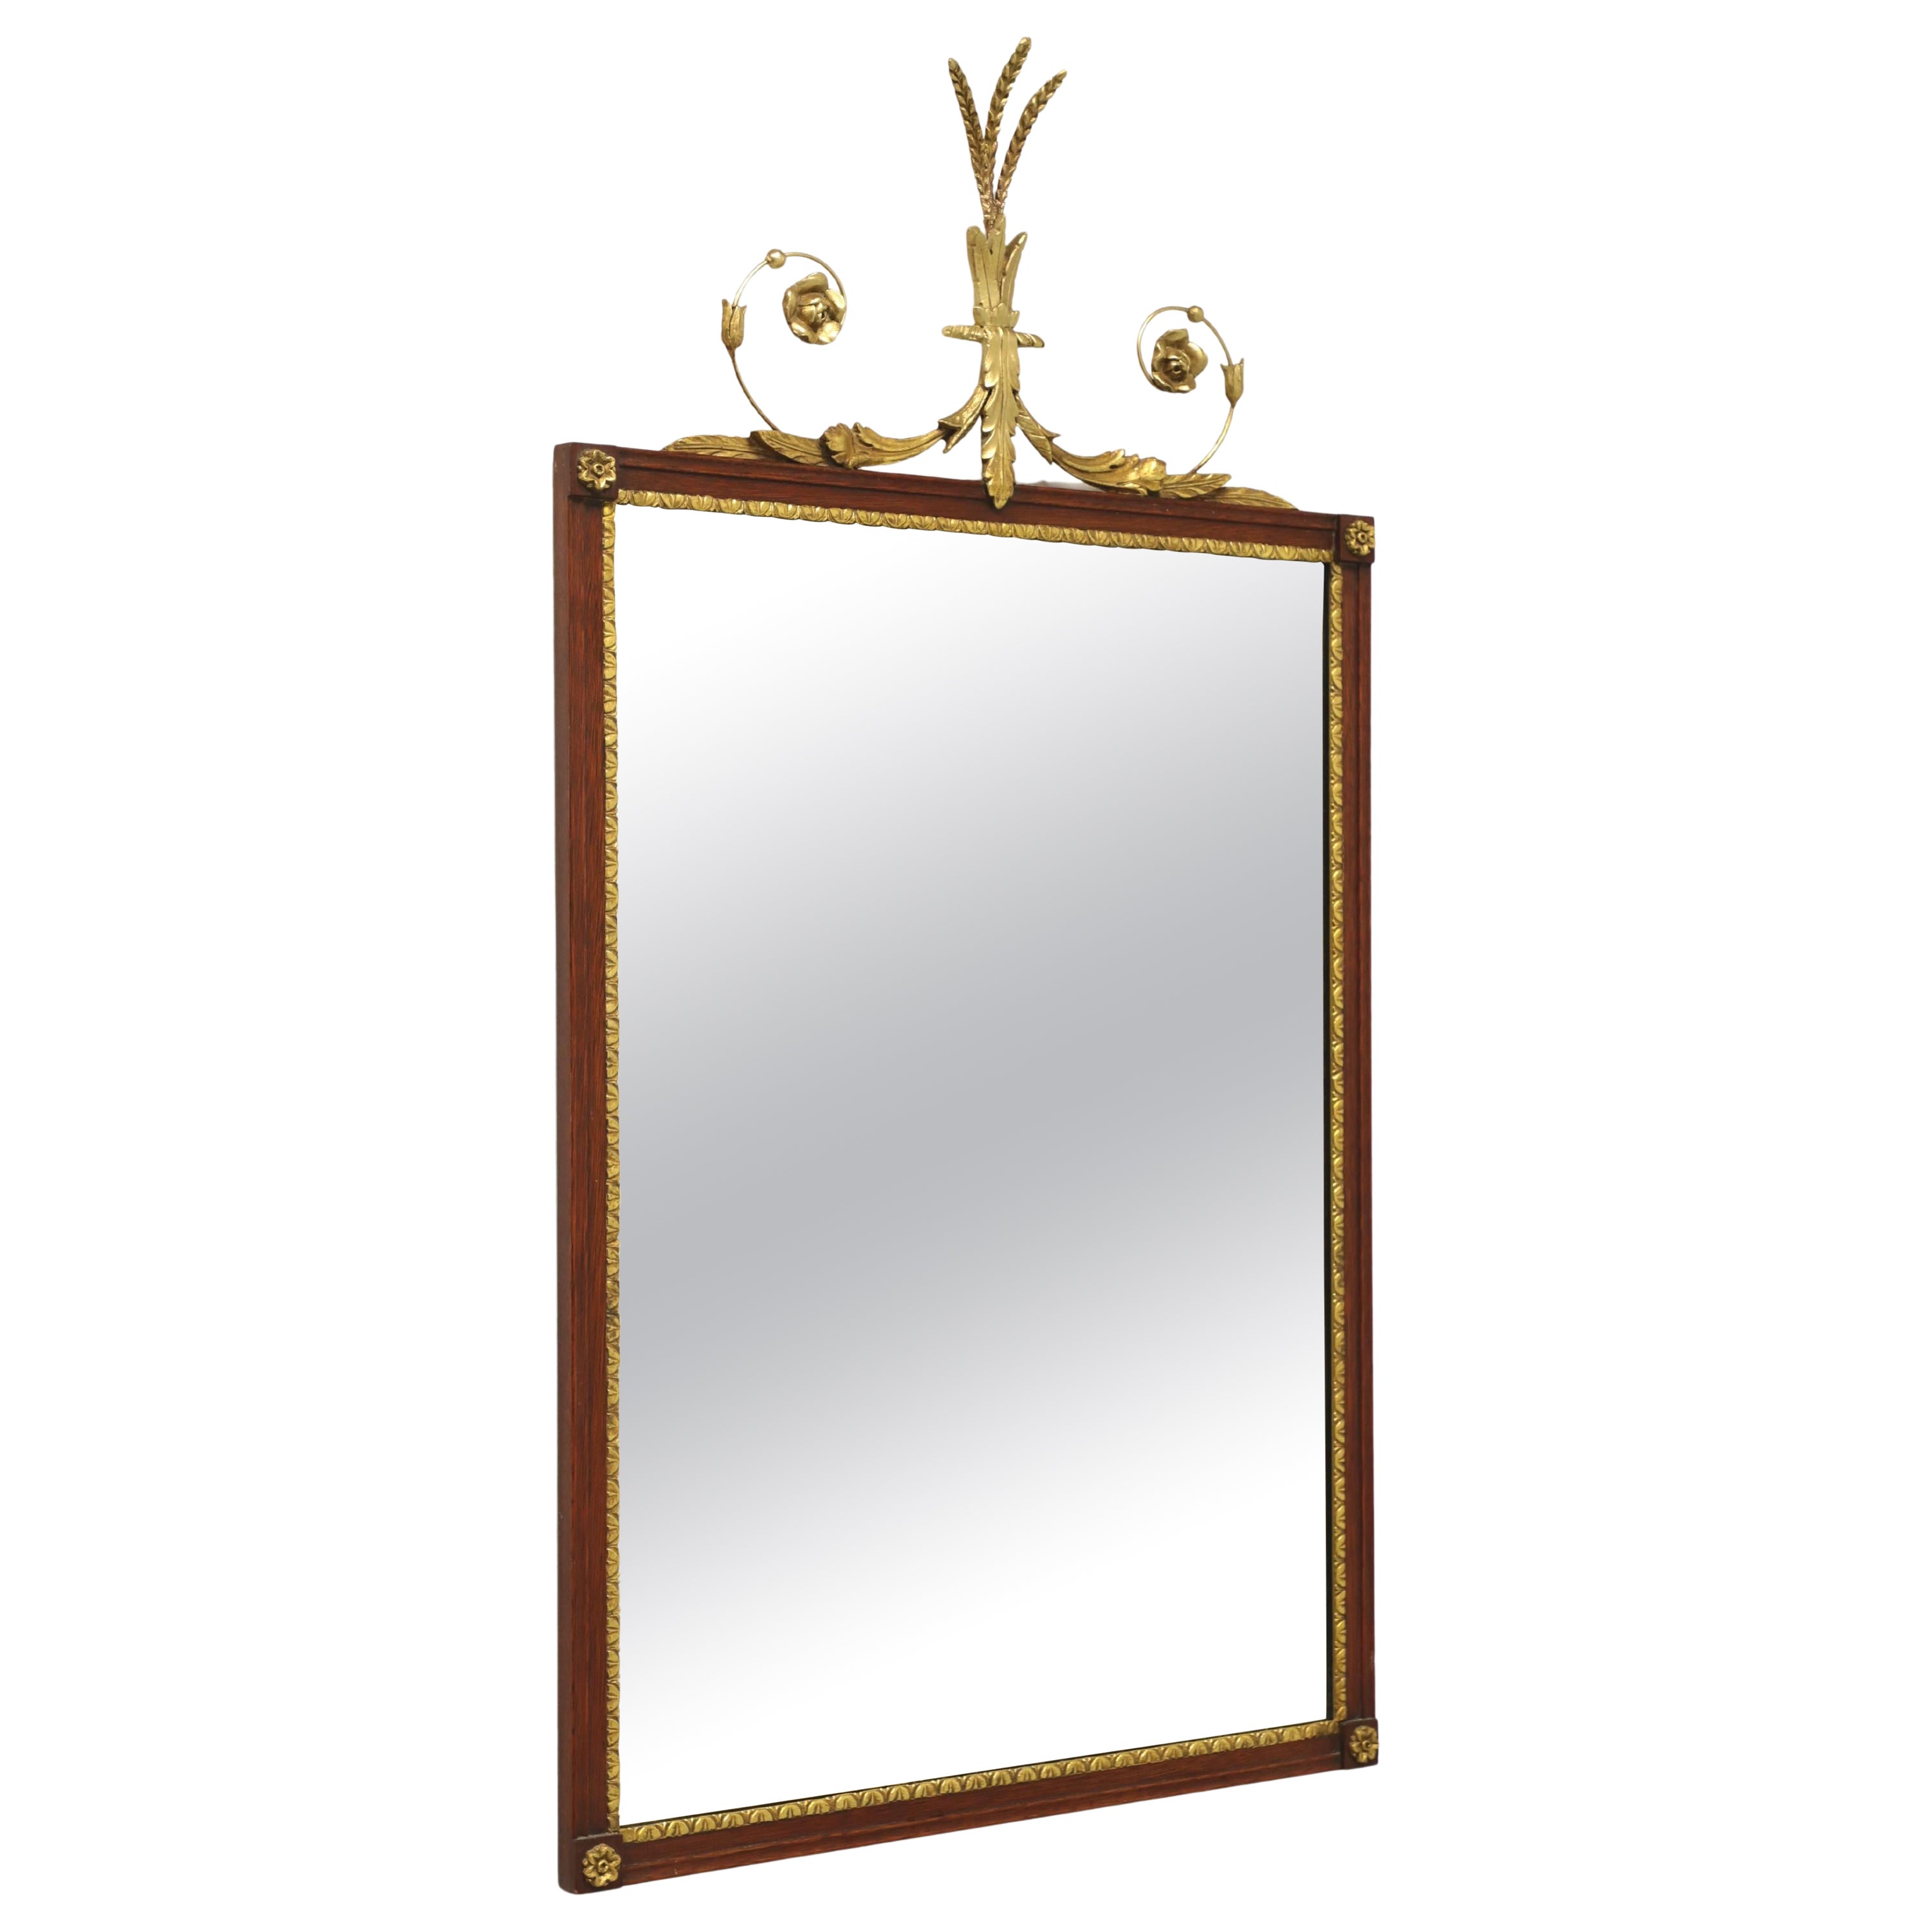 Vintage Mahogany Gilt Neoclassical Style Rectangular Wall Mirror For Sale